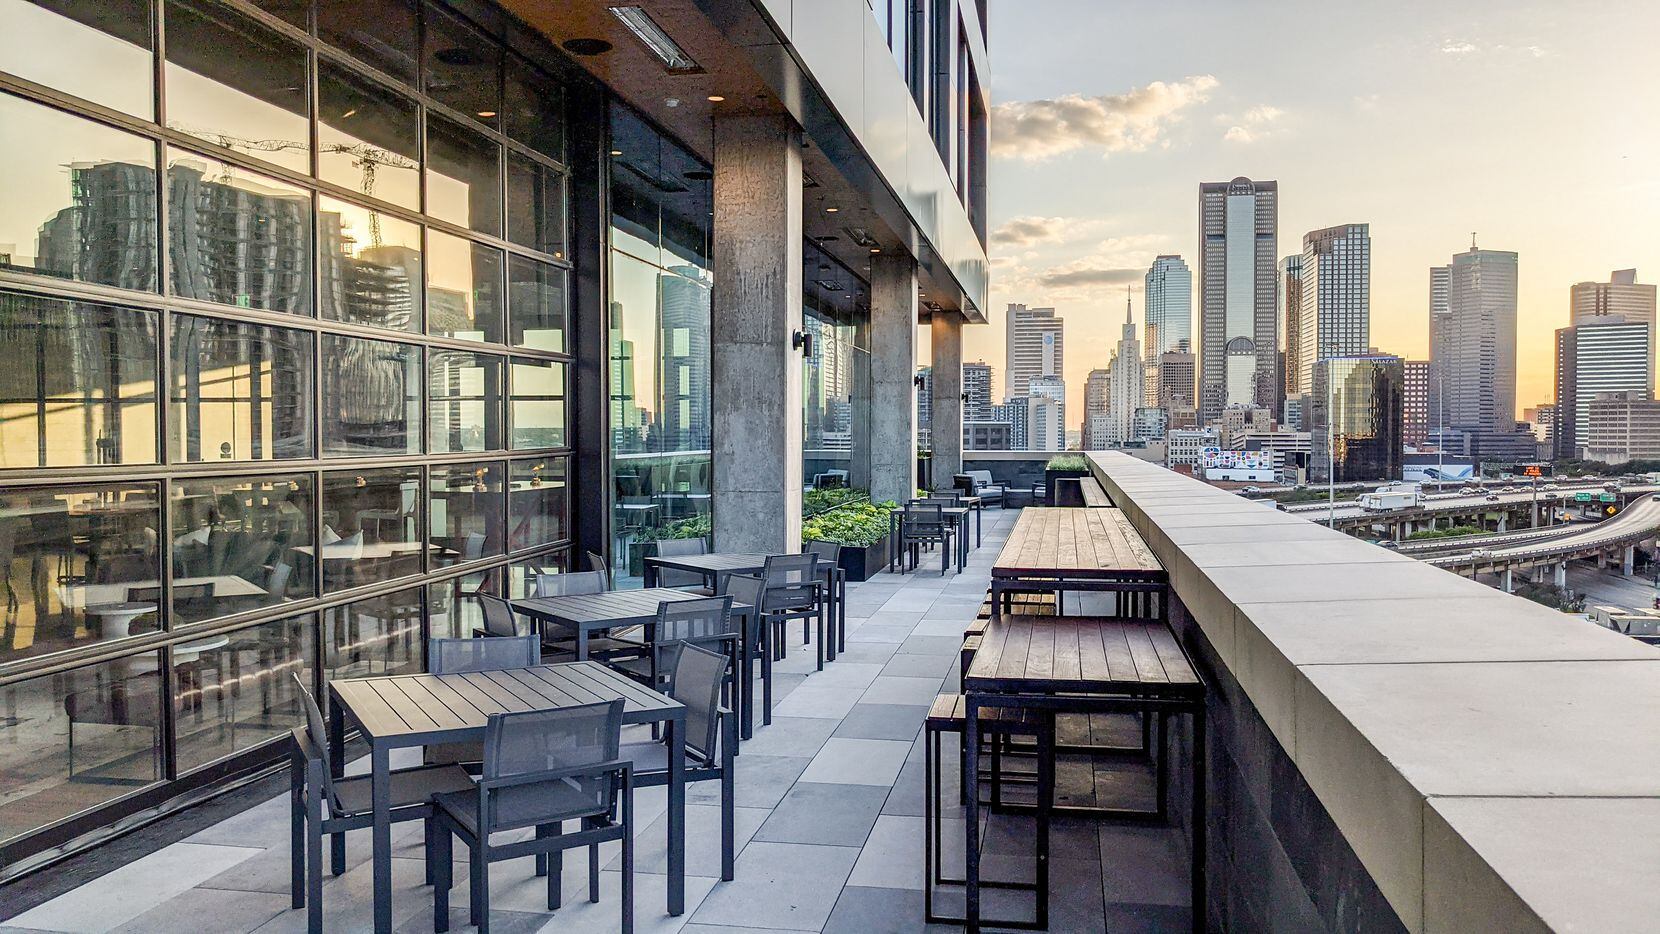 The Stack office building has an outdoor terrace on the 10th floor.